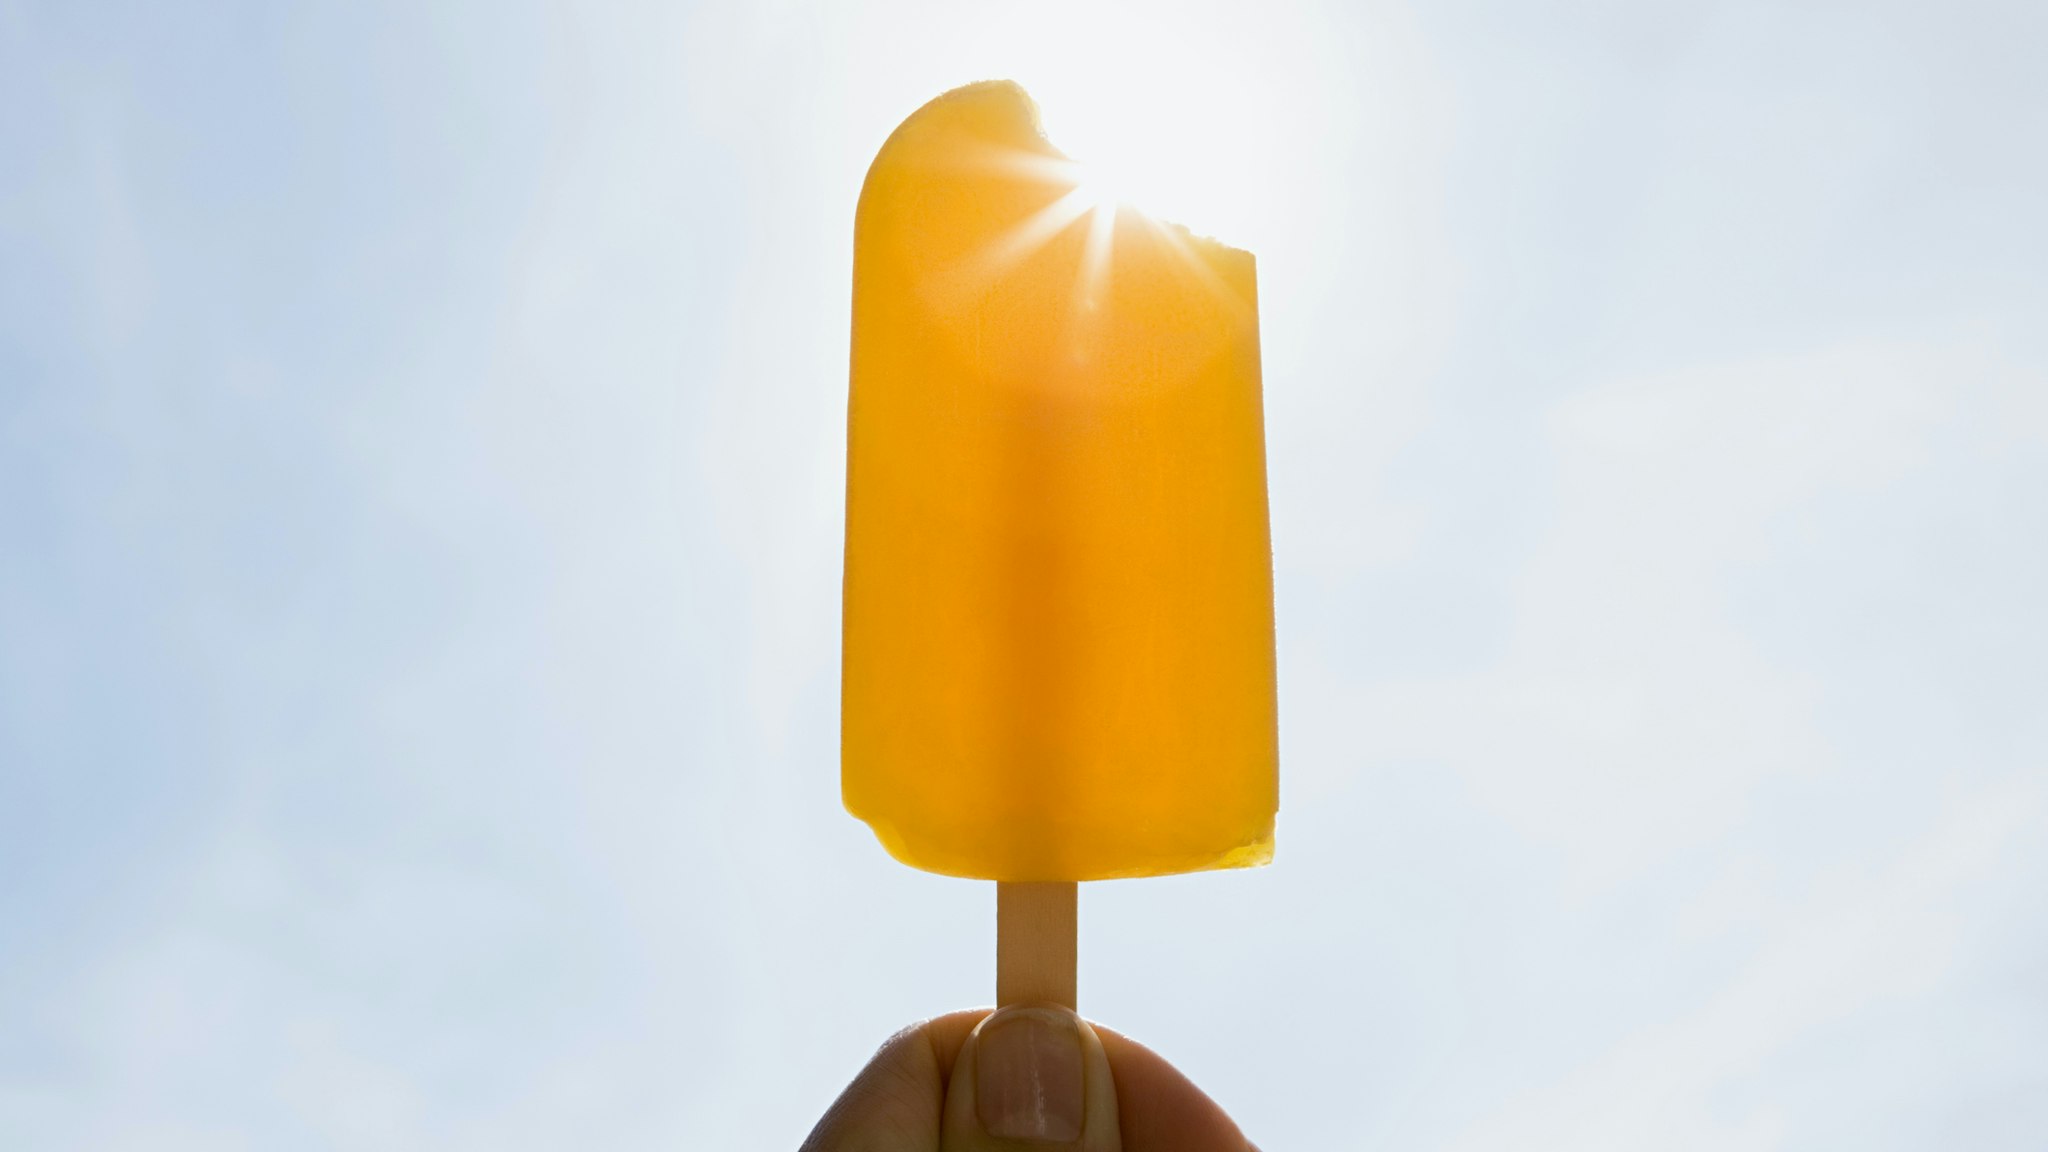 Person holding an ice lolly on a sunny day